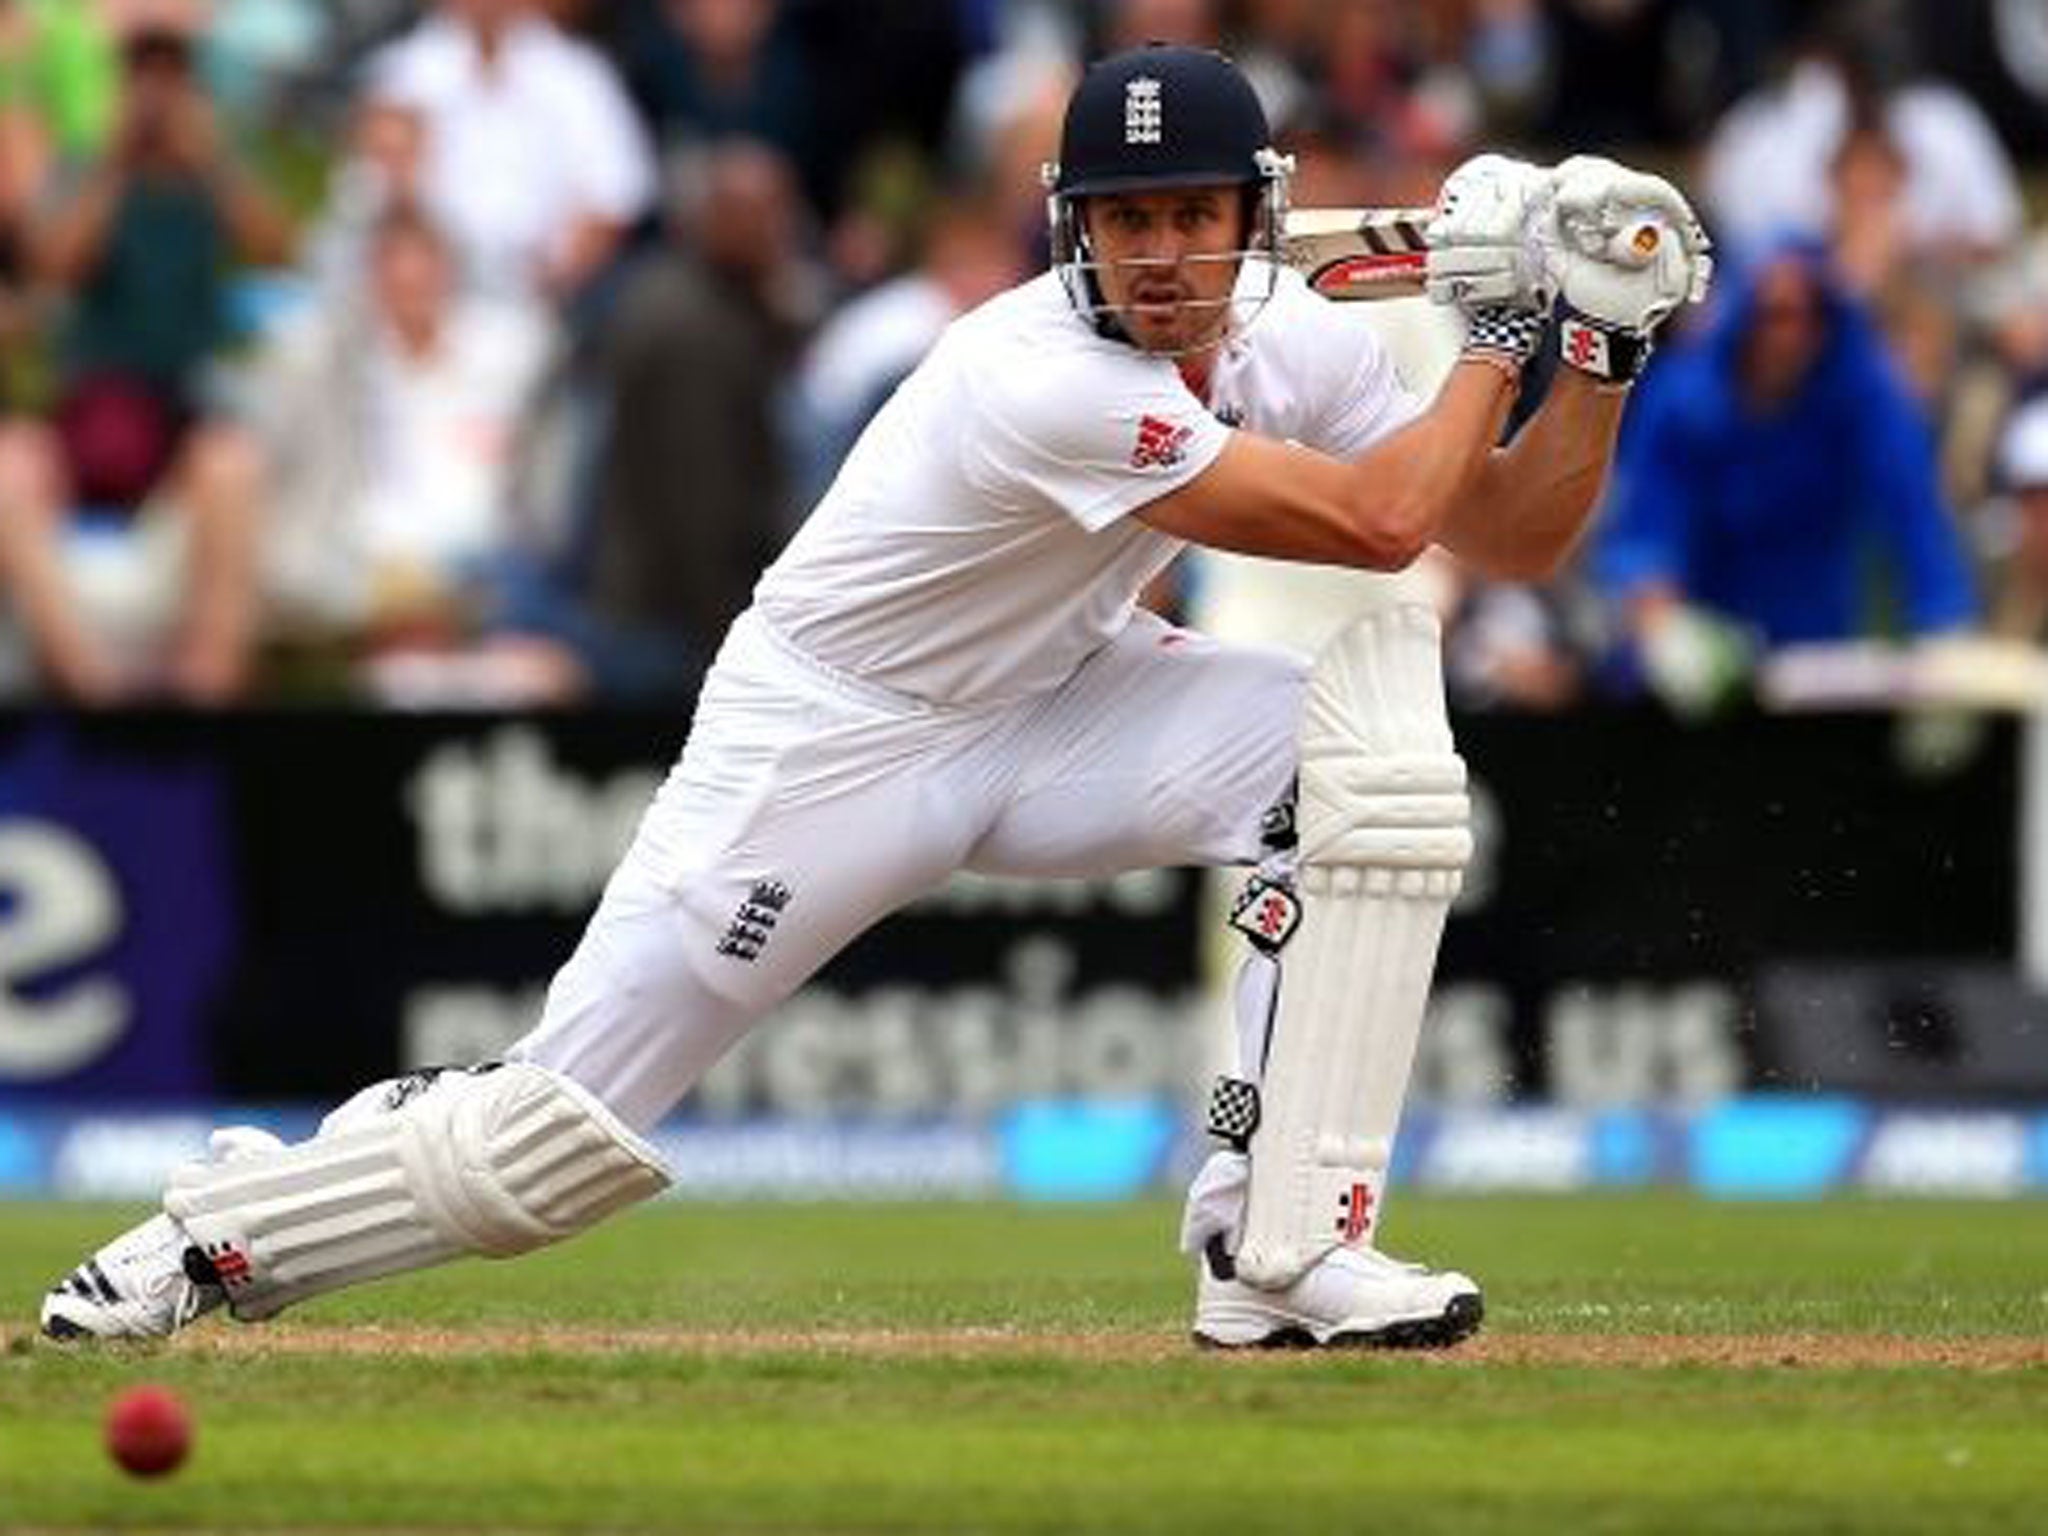 Fully Compo: Nick Compton in action before reaching his century